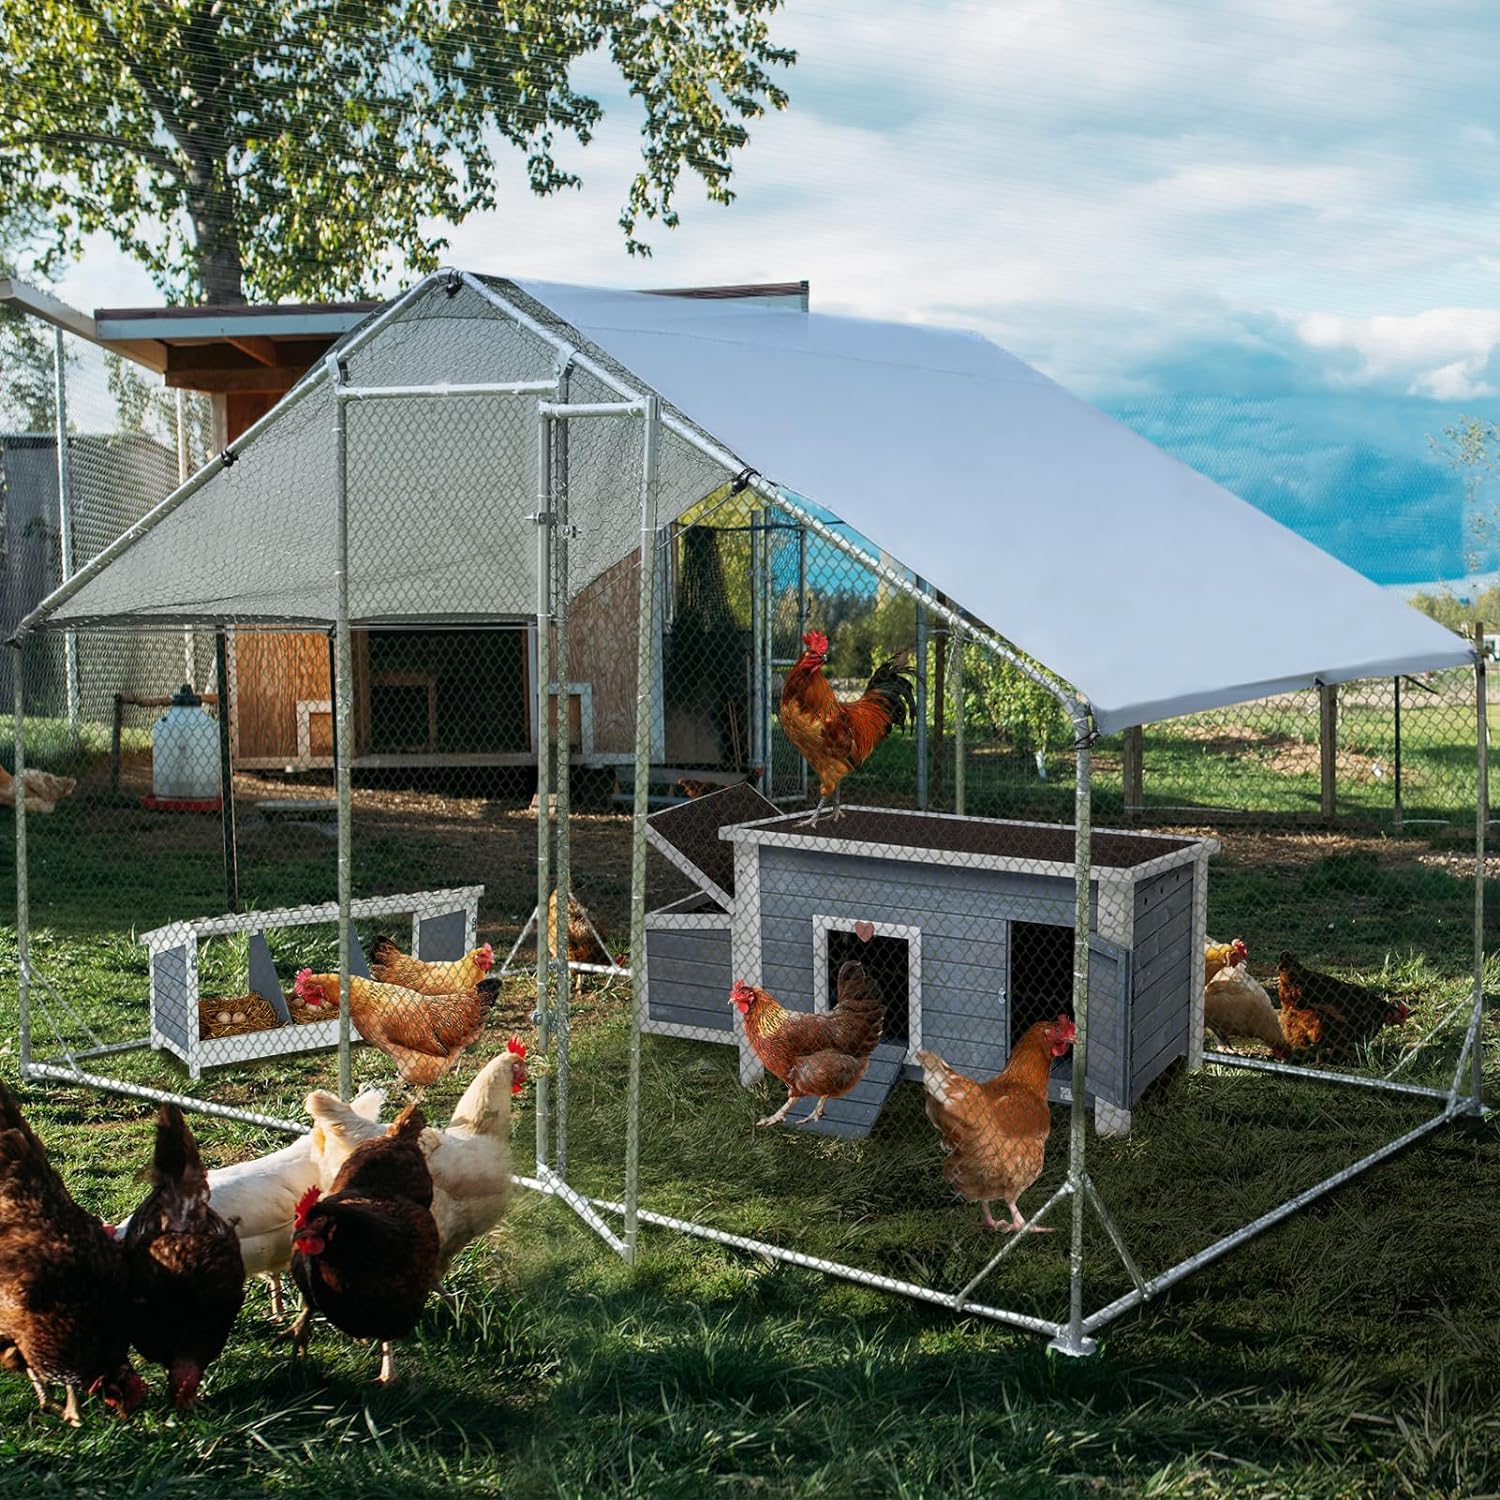 PETSFIT Large Metal Chicken Coop Walk-In with Anti-Rust Durable Steel & 420D Anti-Ultraviolet Waterproof Cover Hen House for Outdoor Farm Use-动物/宠物用品